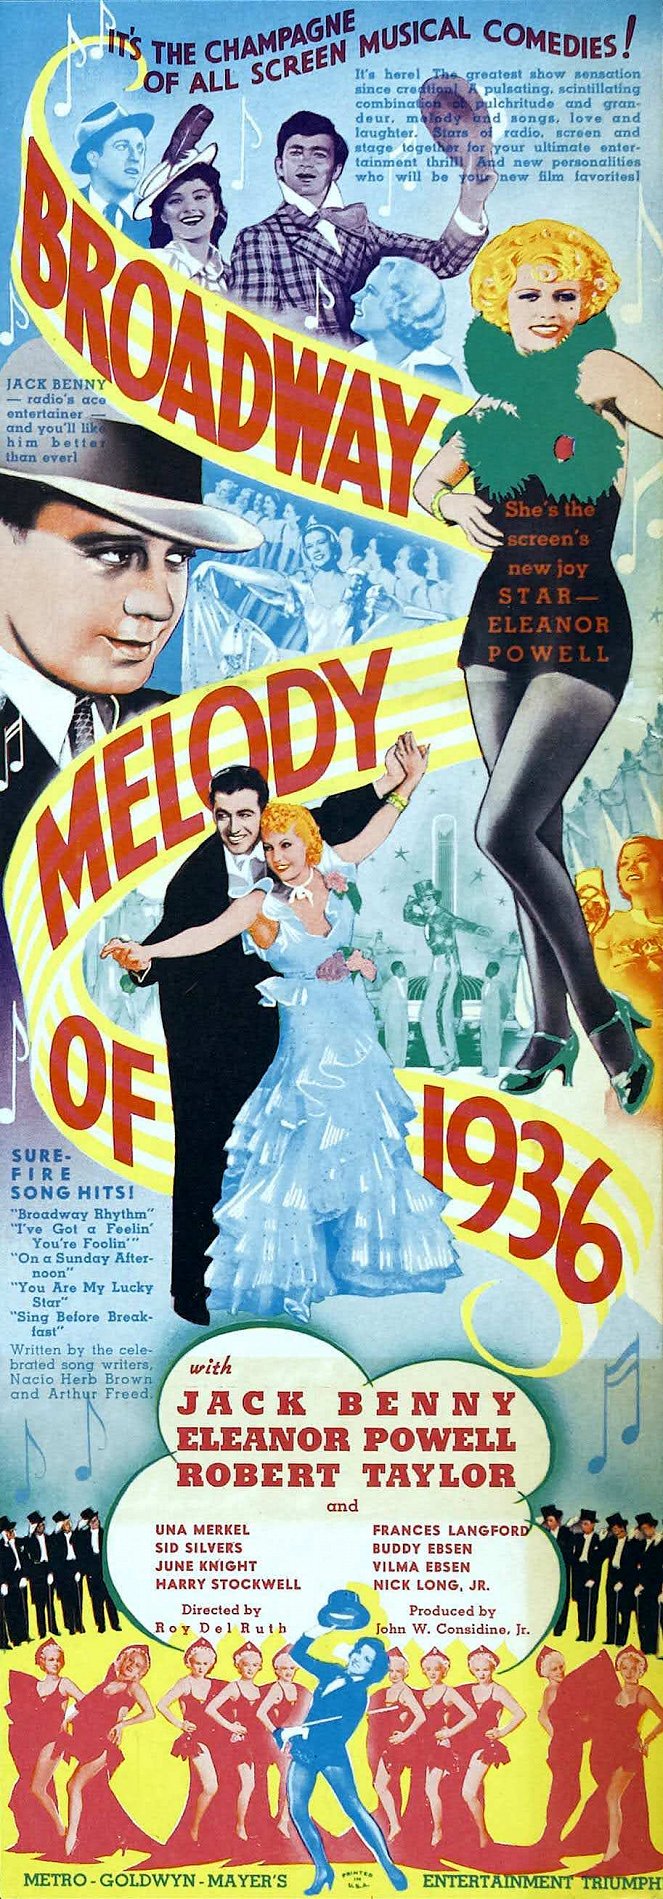 Broadway Melody of 1936 - Posters